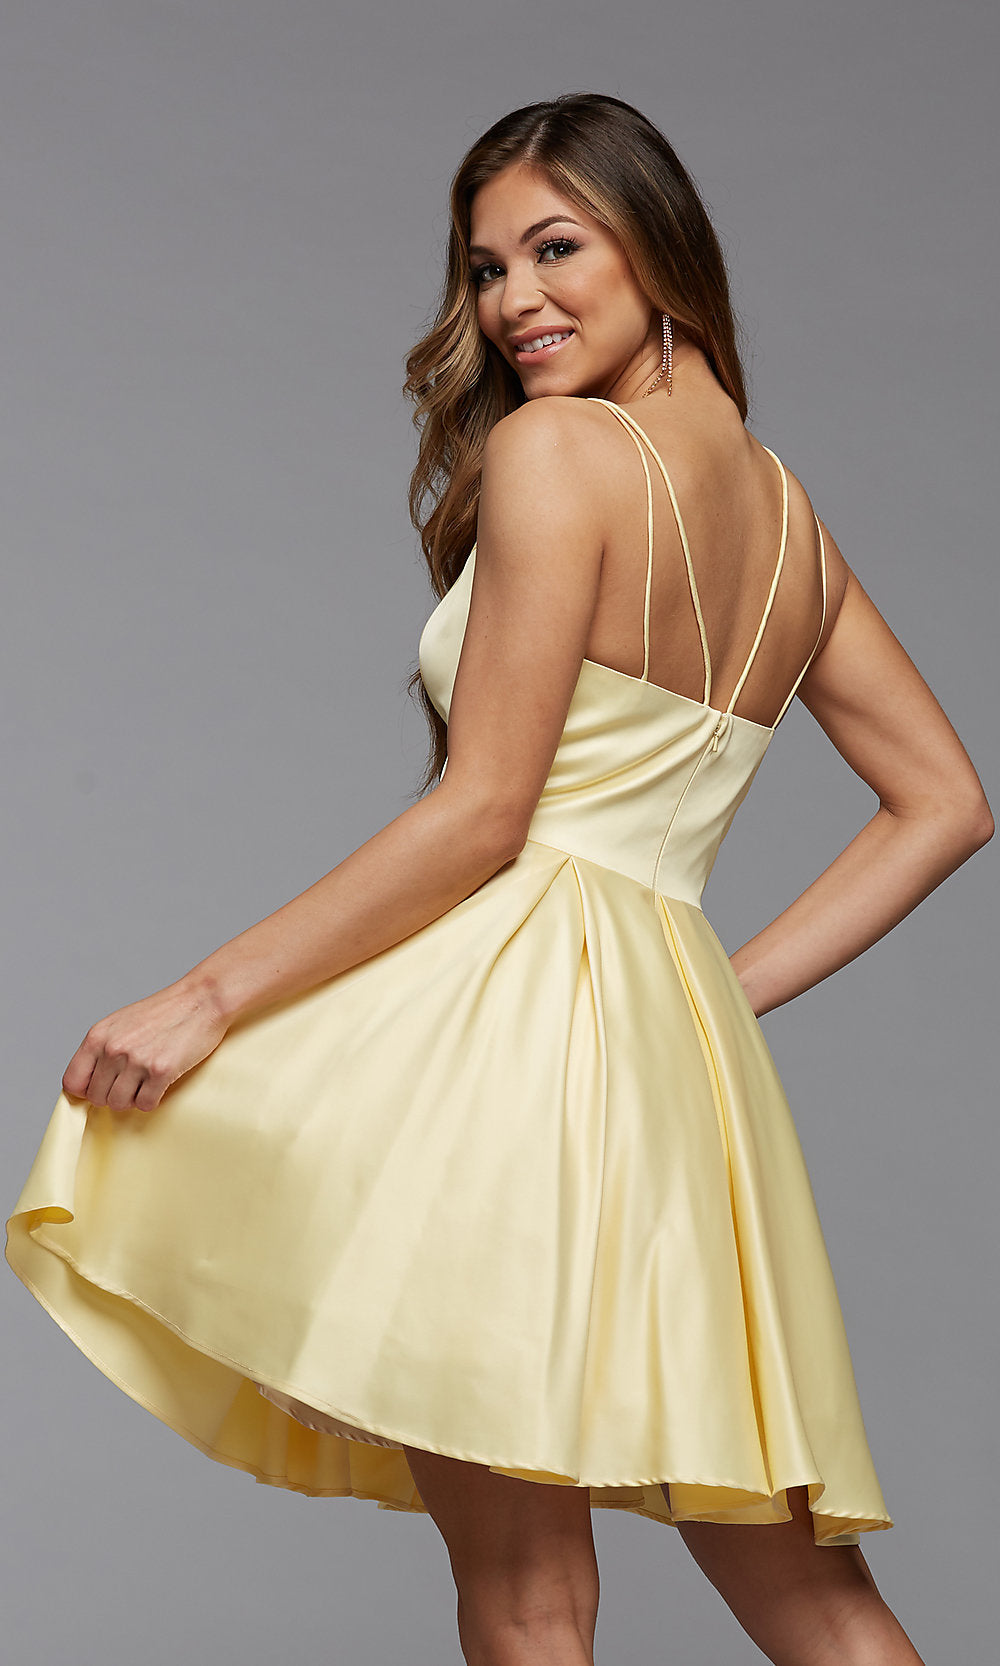  V-Neck Cute Short Fit-and-Flare Prom Dress